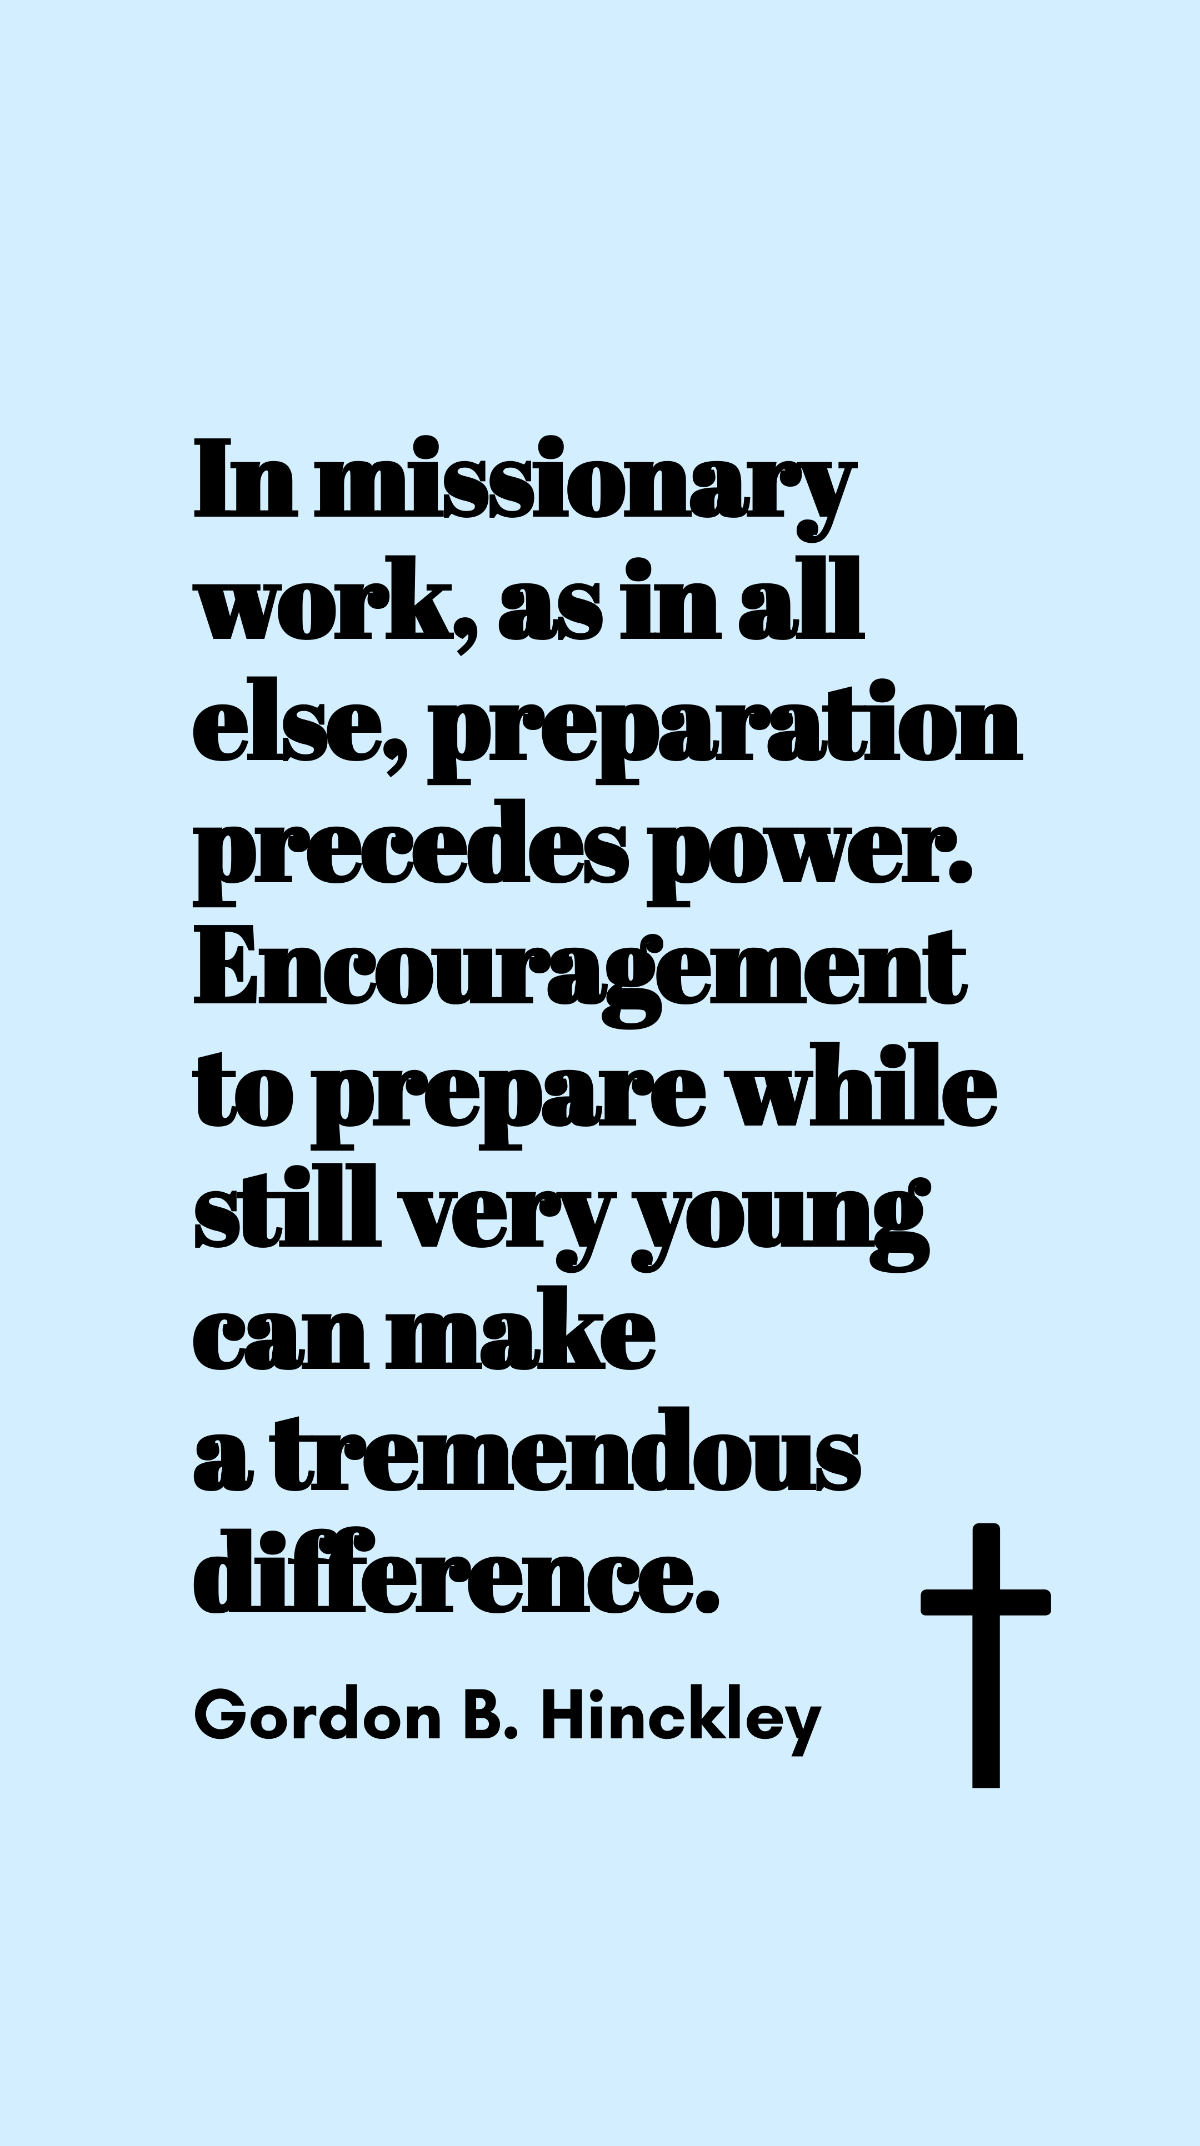 Gordon B. Hinckley - In missionary work, as in all else, preparation precedes power. Encouragement to prepare while still very young can make a tremendous difference.